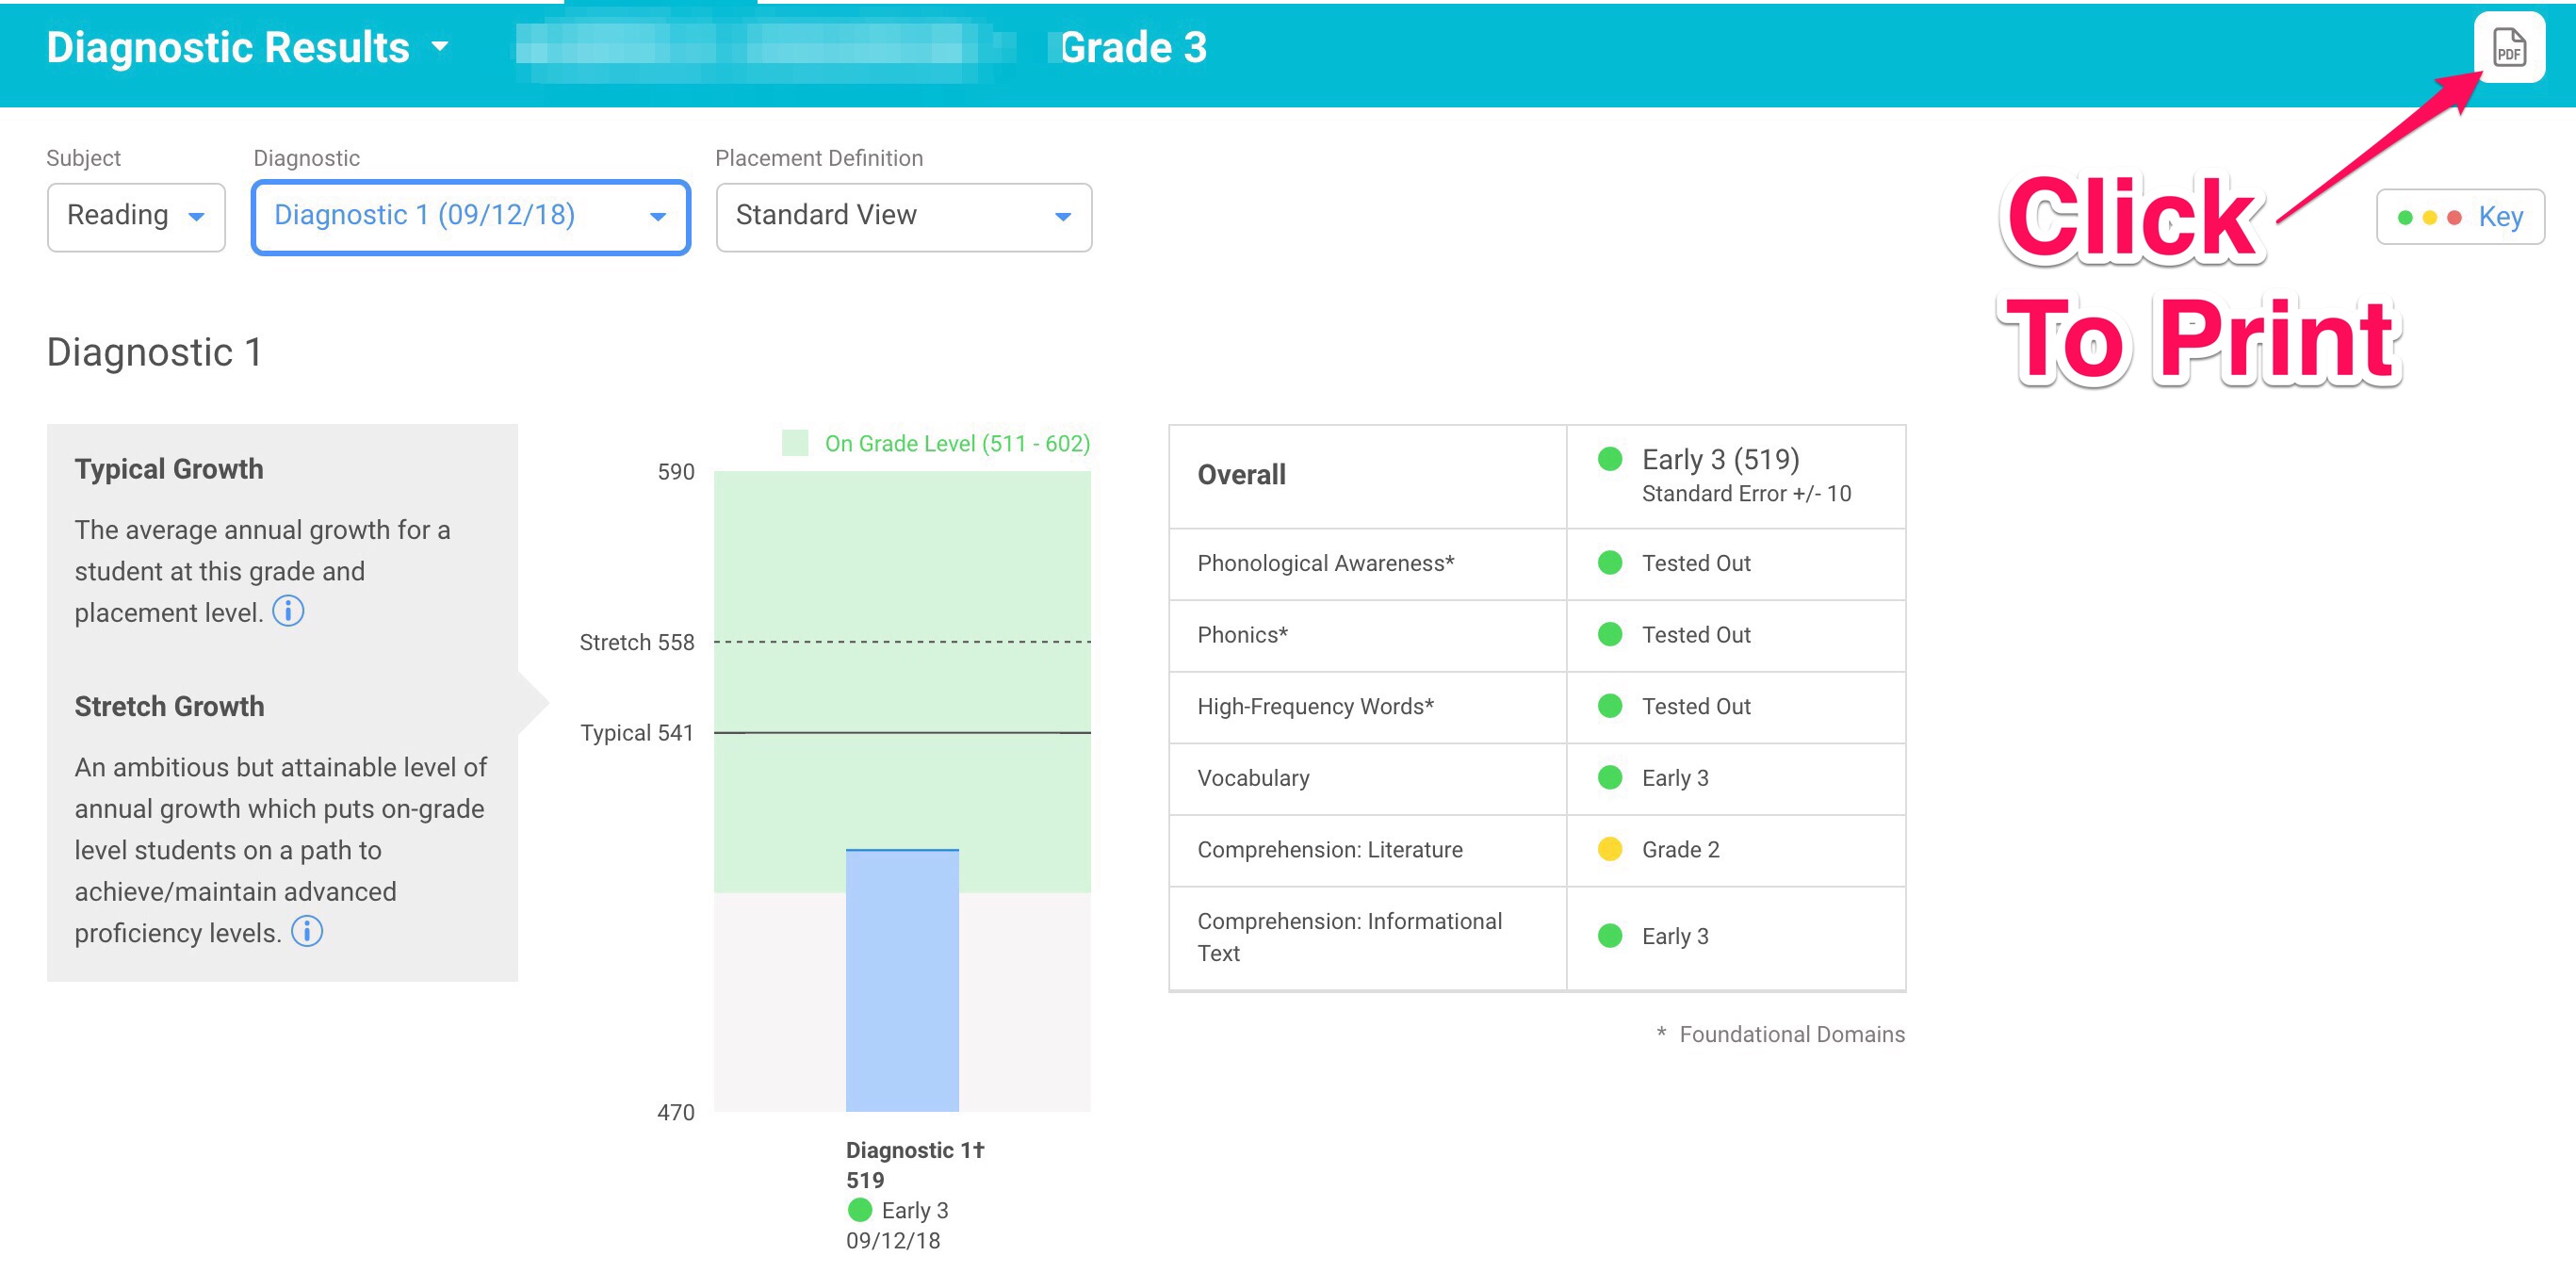 iReady is a technology based program used to improve students Reading and Math performance. However, in order for it to work, you have to know how to effectively monitor and track students' progress. This post has great ideas on how to do this in order to ensure your kiddos succeed!